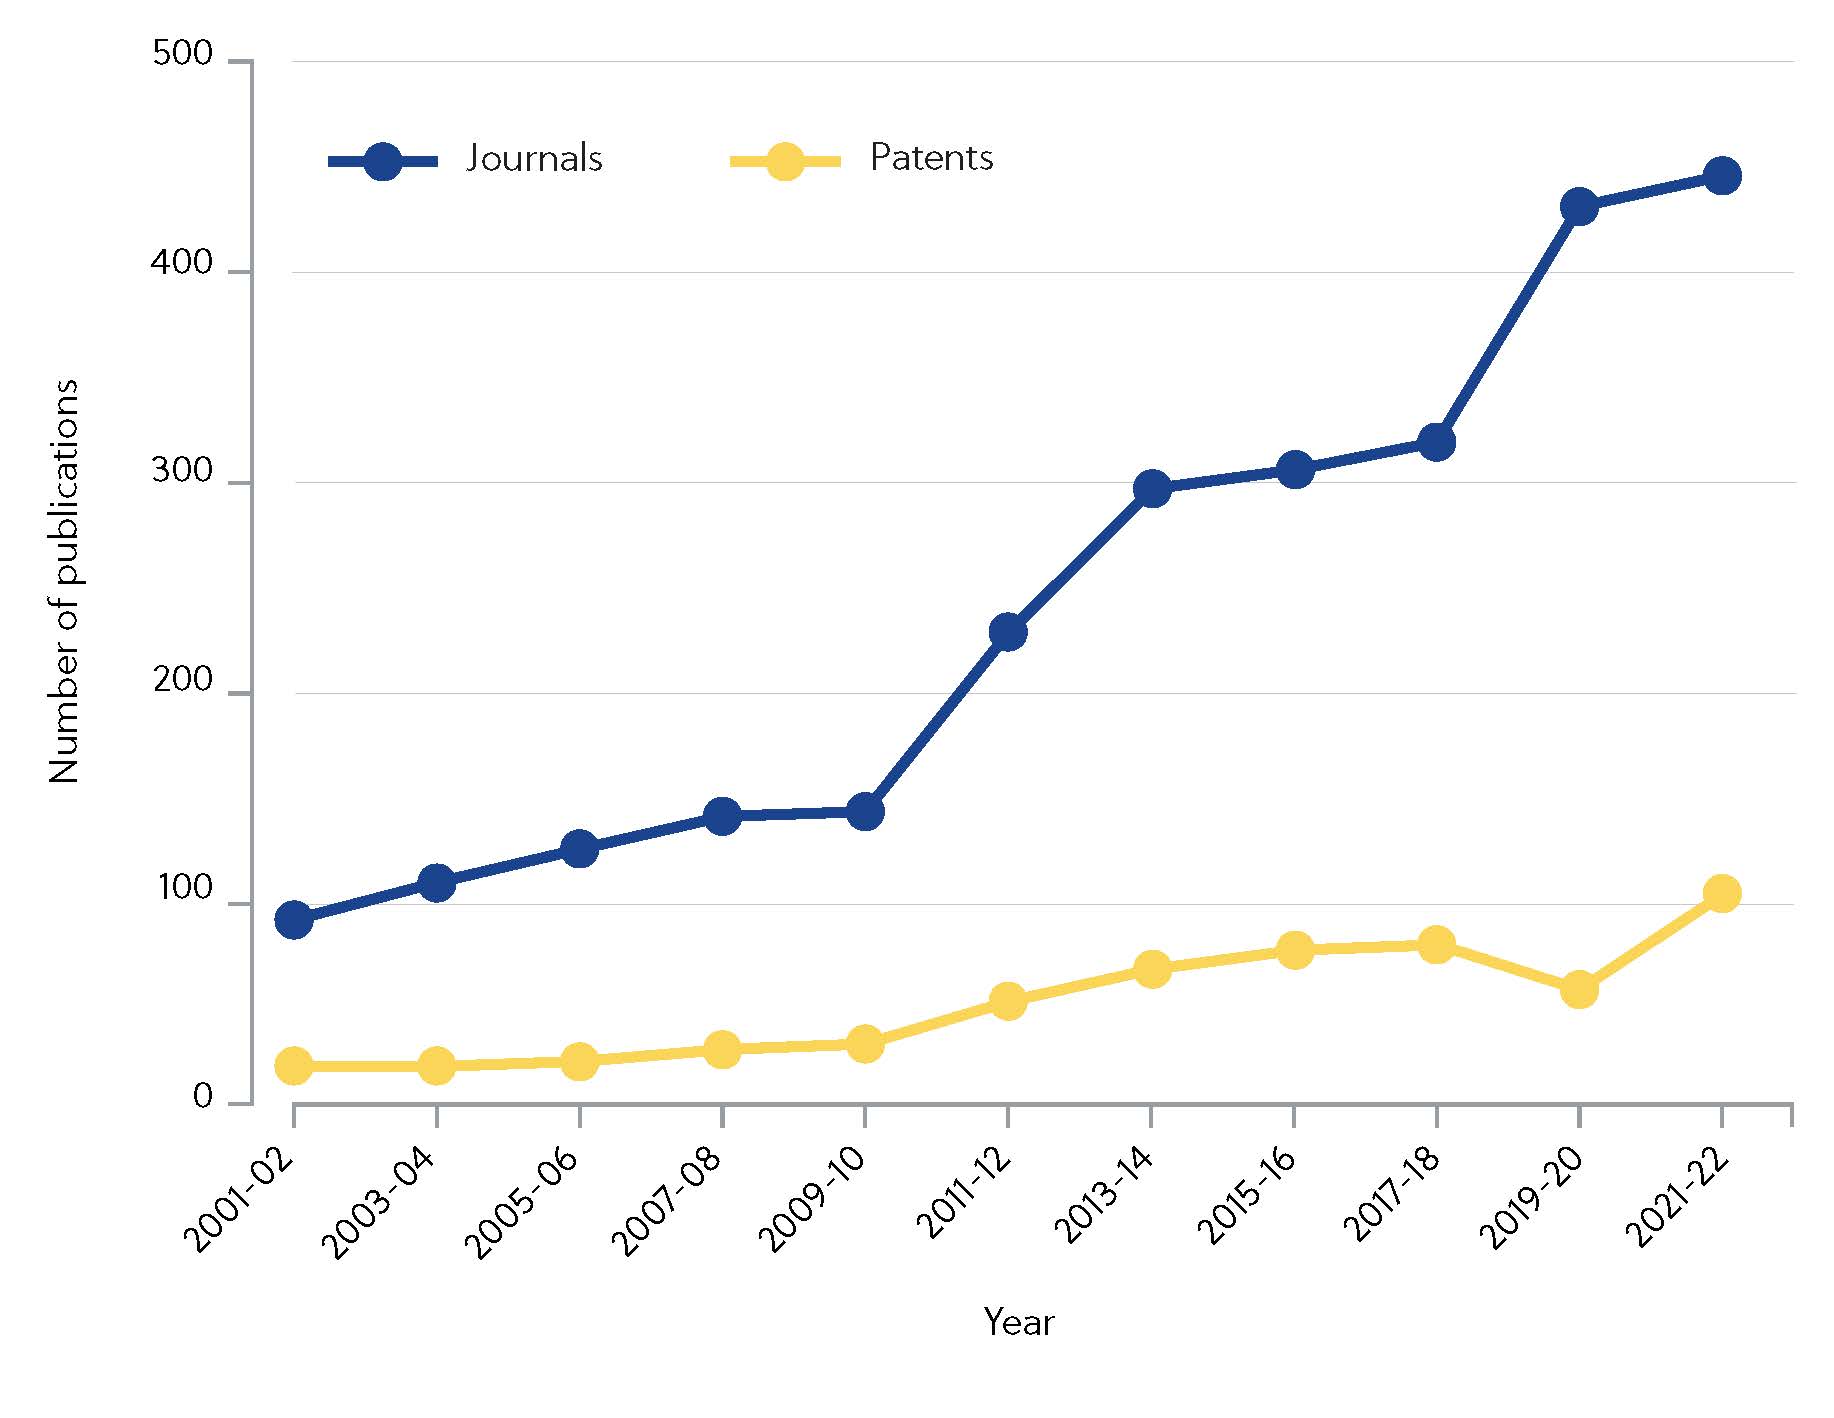 fig 1 Growth of documents (journal and patents)